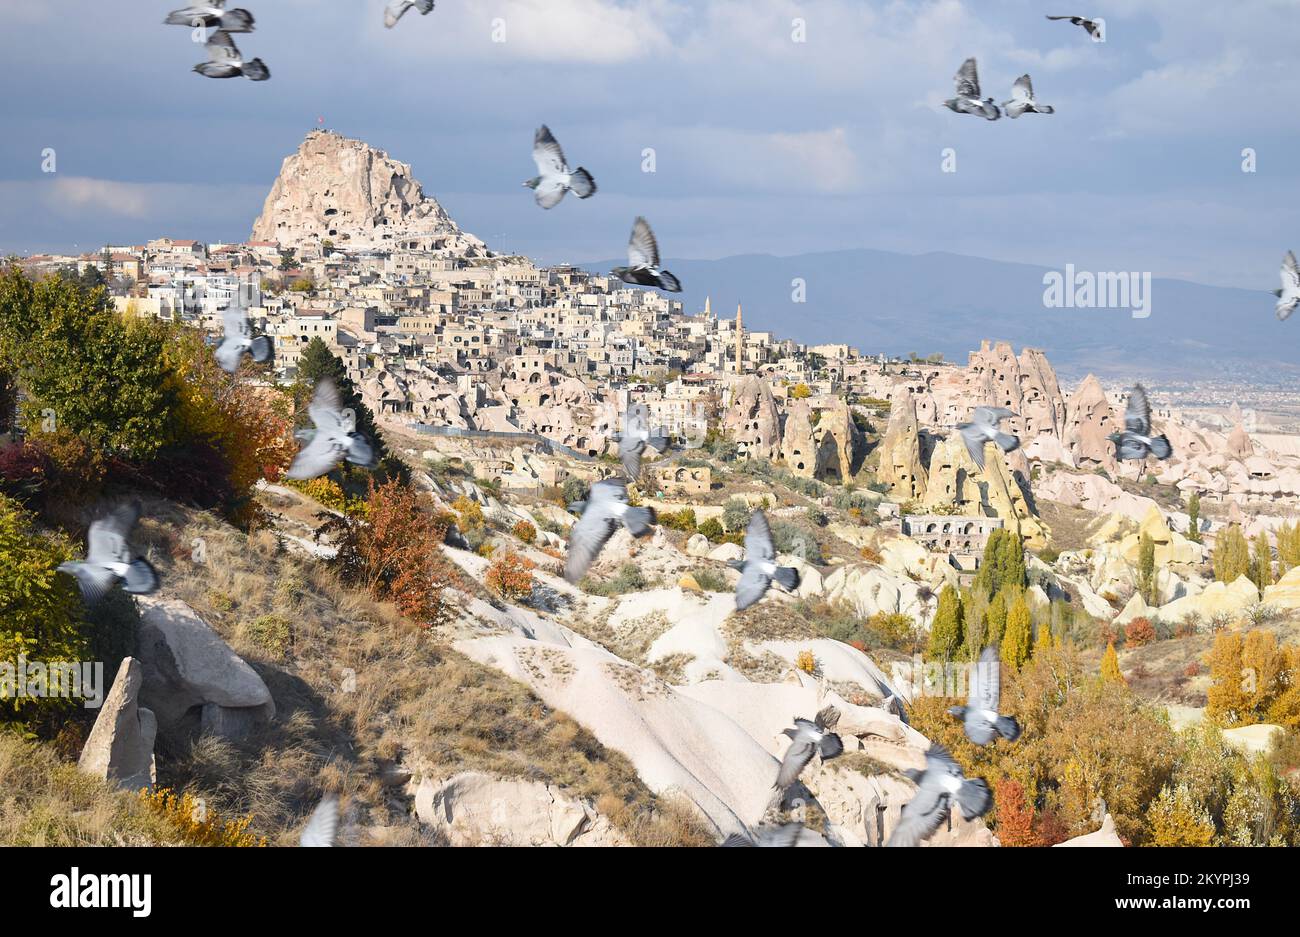 View of Uçhisar castle and cave city carved into the fairy chimneys in Cappadocia, Turkey, taken from Pigeon Valley on a bright cloudy Autumn day. Stock Photo